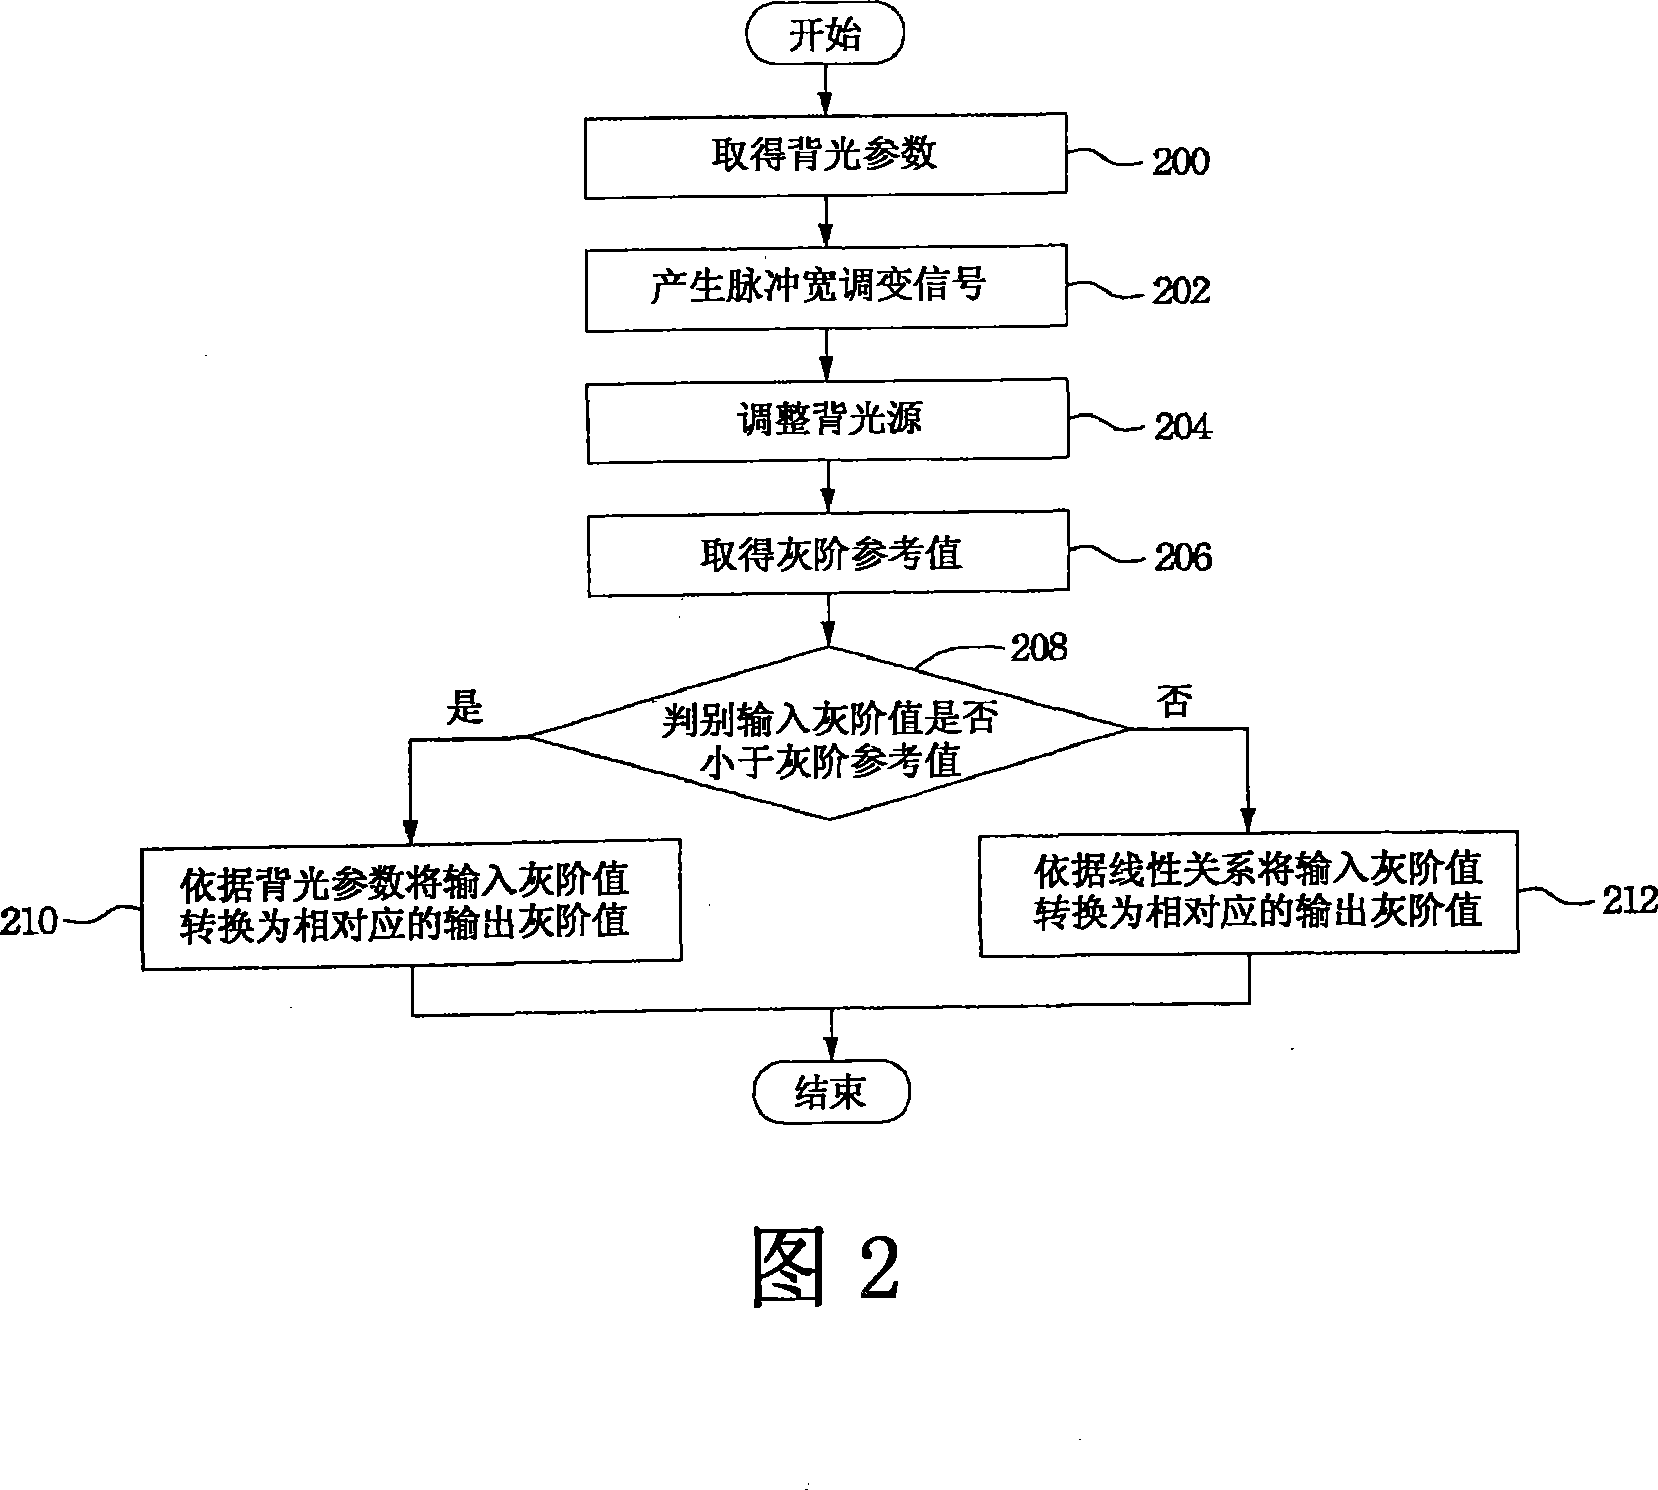 Image processing method in LCD